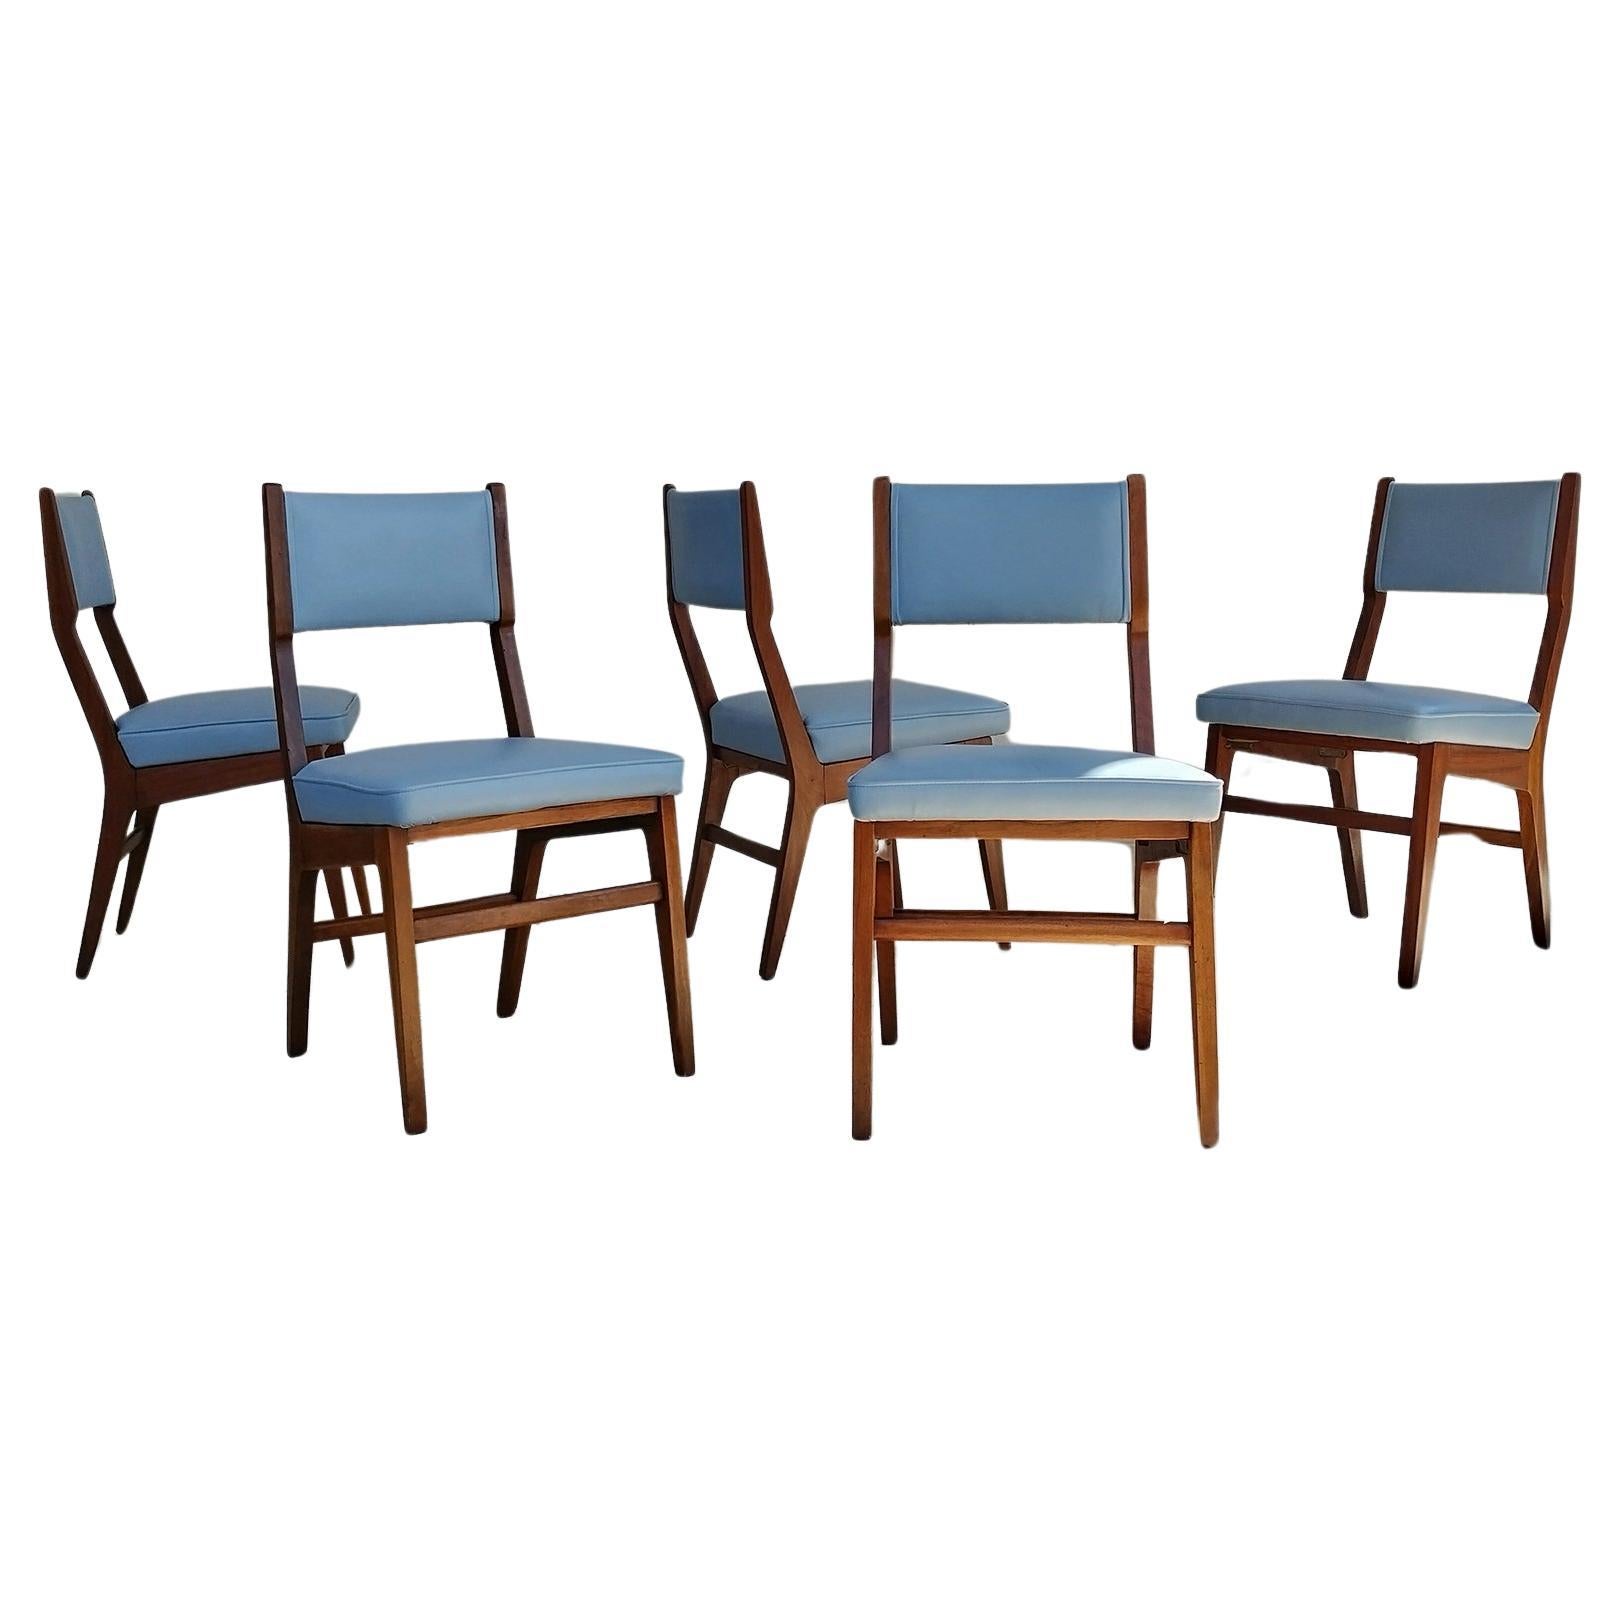 Set of Five I.S.A. Bergamo Chairs Attributed to Gio Ponti 1950s